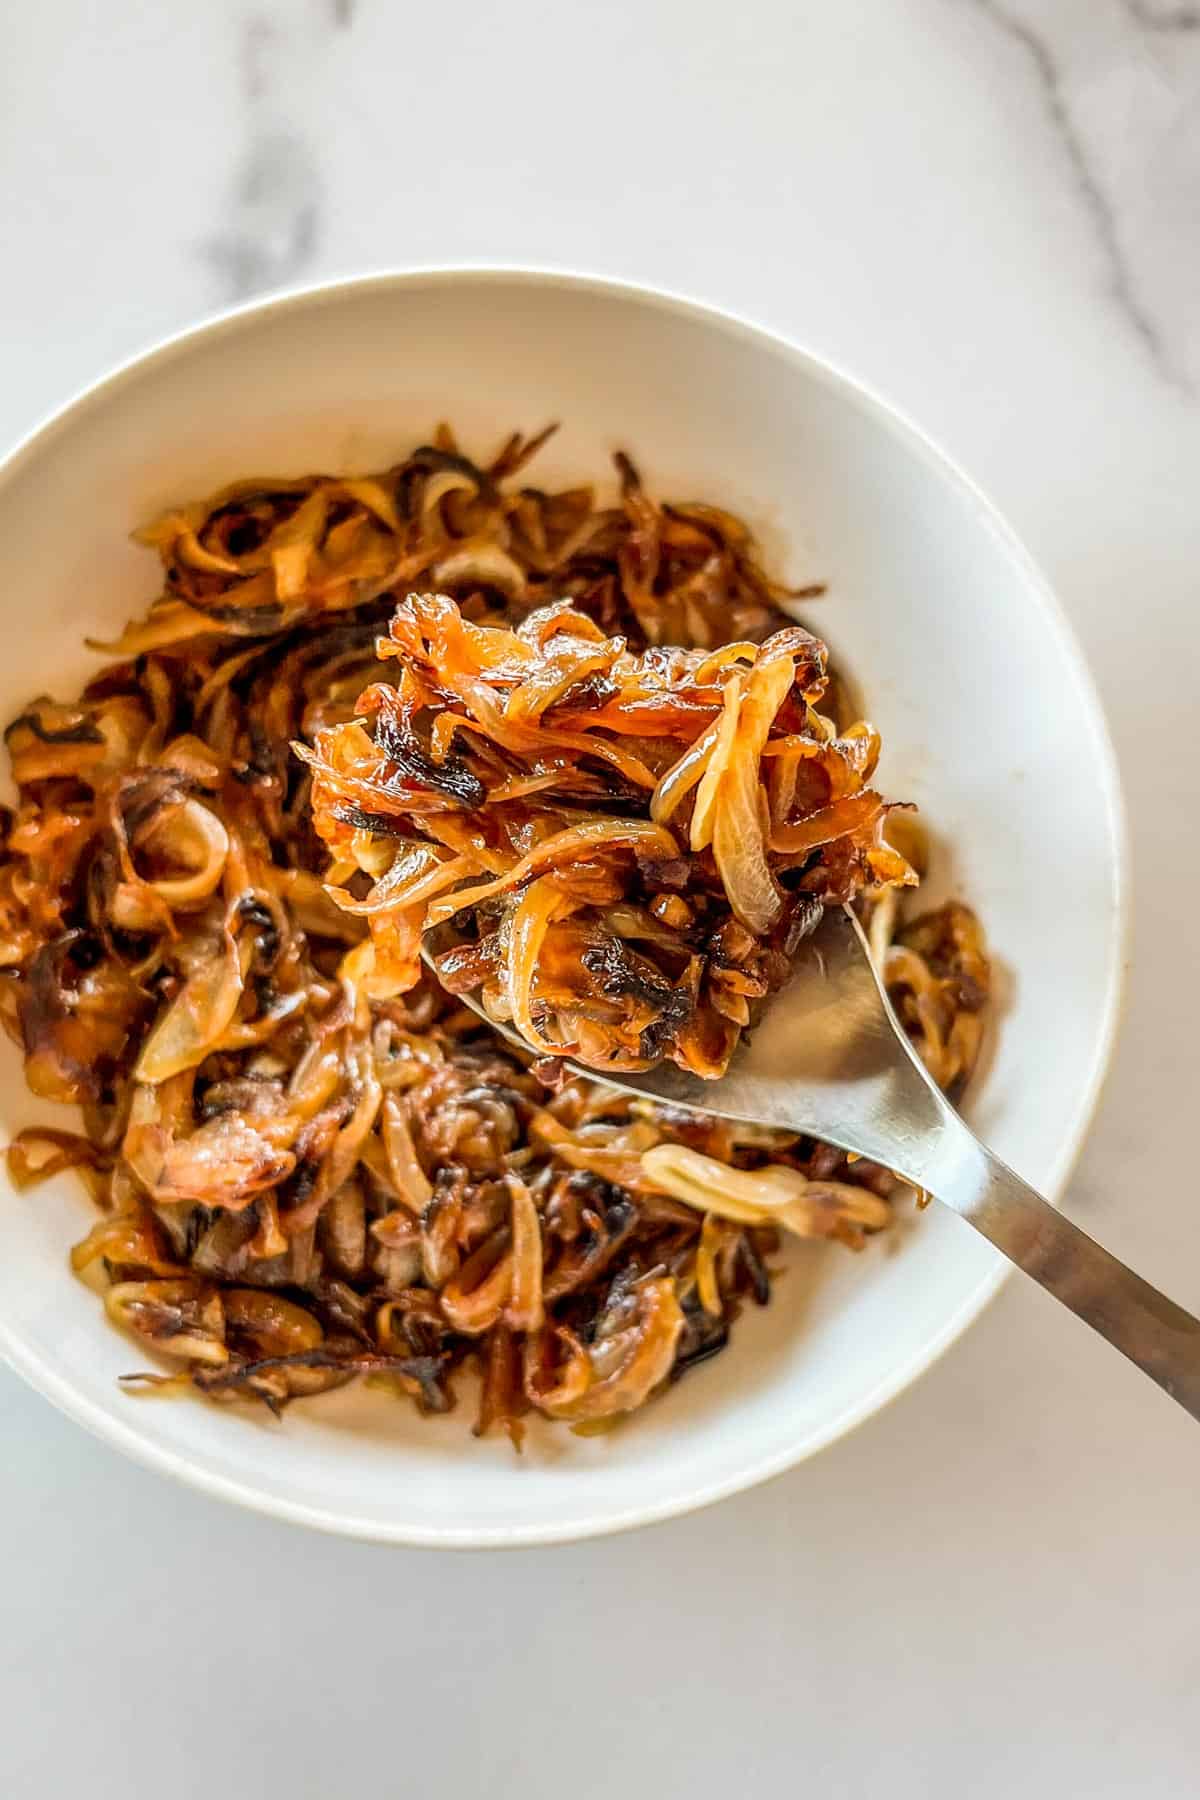 Caramelized onions in a bowl and spoon.